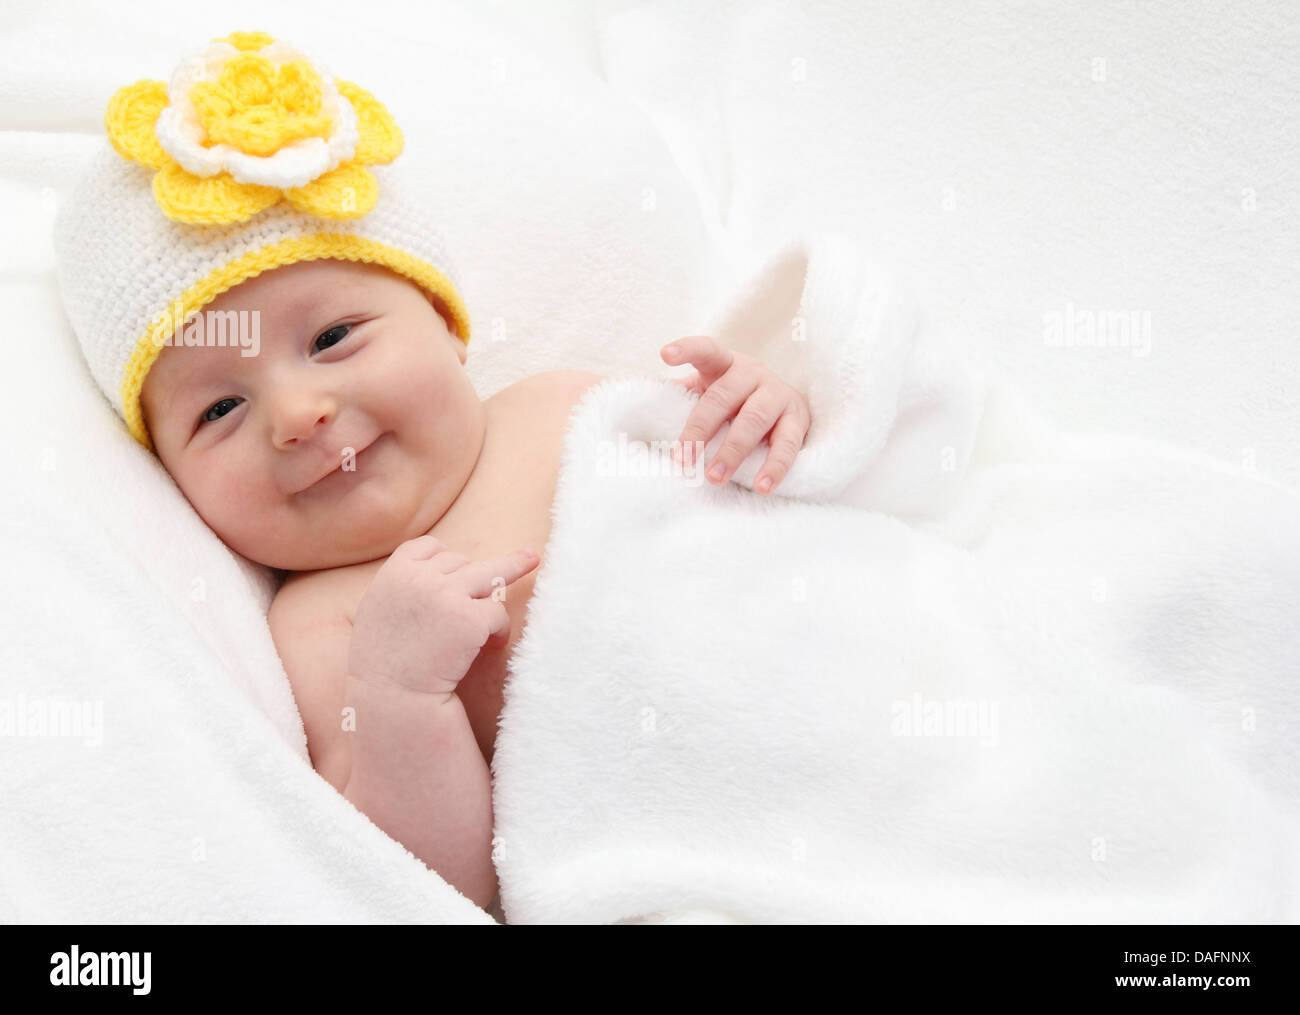 Baby with a knitted white hat baby on back Stock Photo